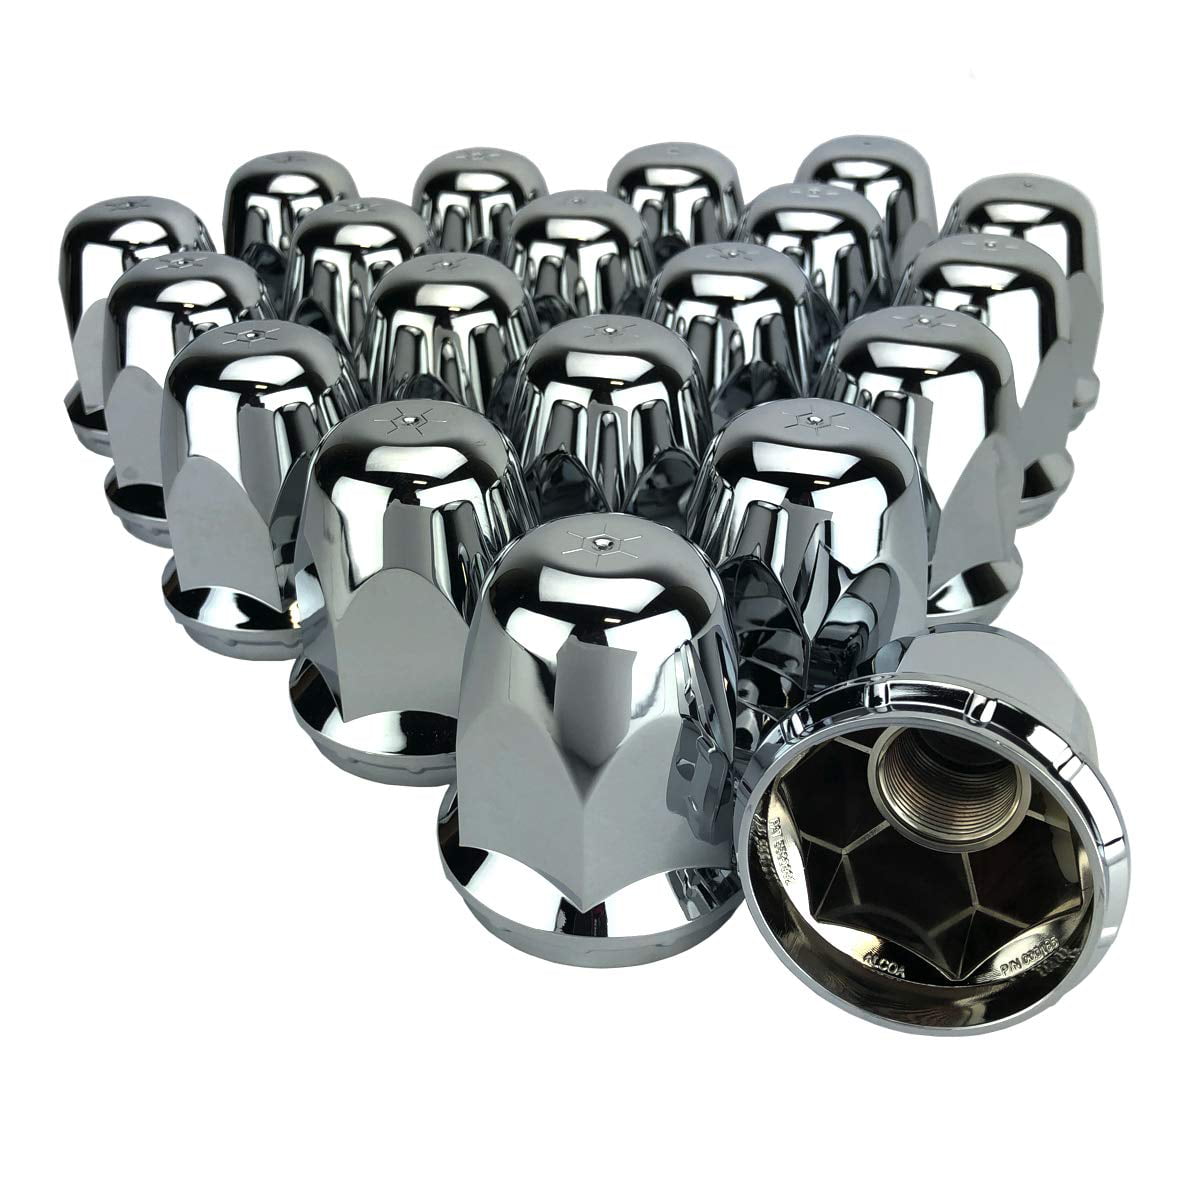 33 mm Chrome Lug Nut Covers with Flanges For Trucks Trailers 2-1/4" Height 60pcs